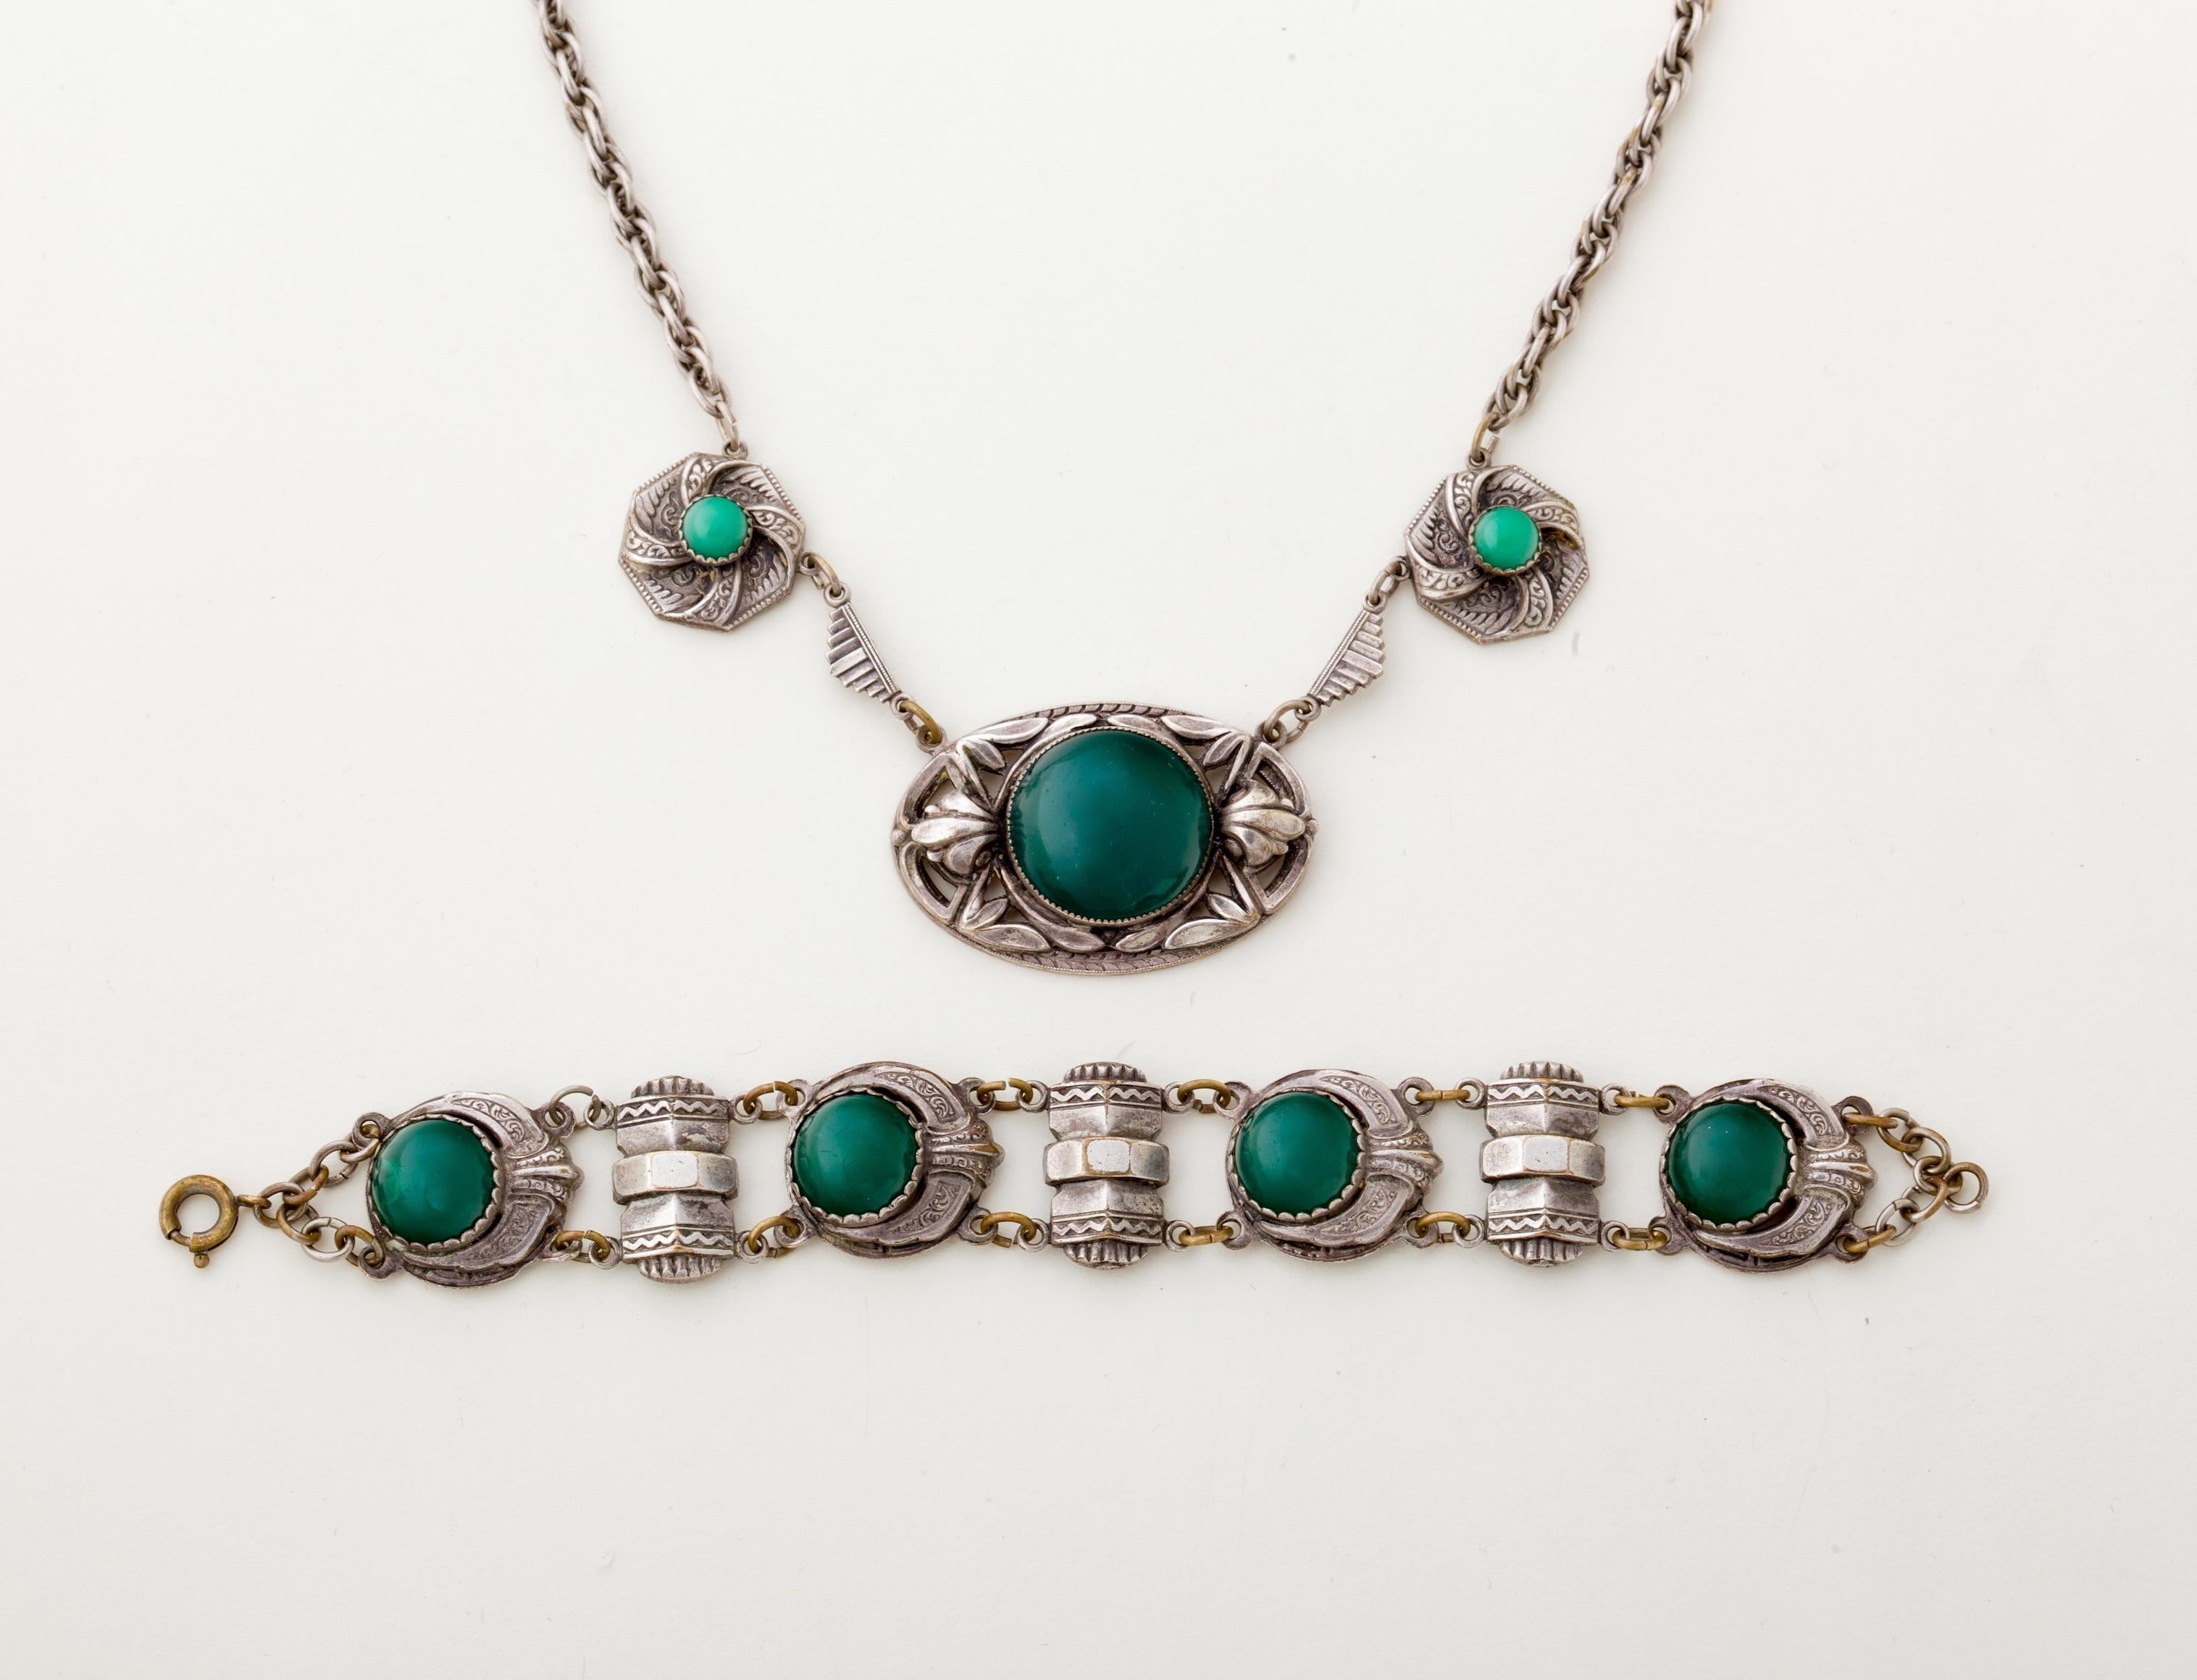 Stunning with beautiful details is this European Art Nouveau Necklace and bracelet with green cabochon stones and most likely a chromium finish on the bracelet and silver plate on the necklace medallion.  Unsigned.  This a great example of Art